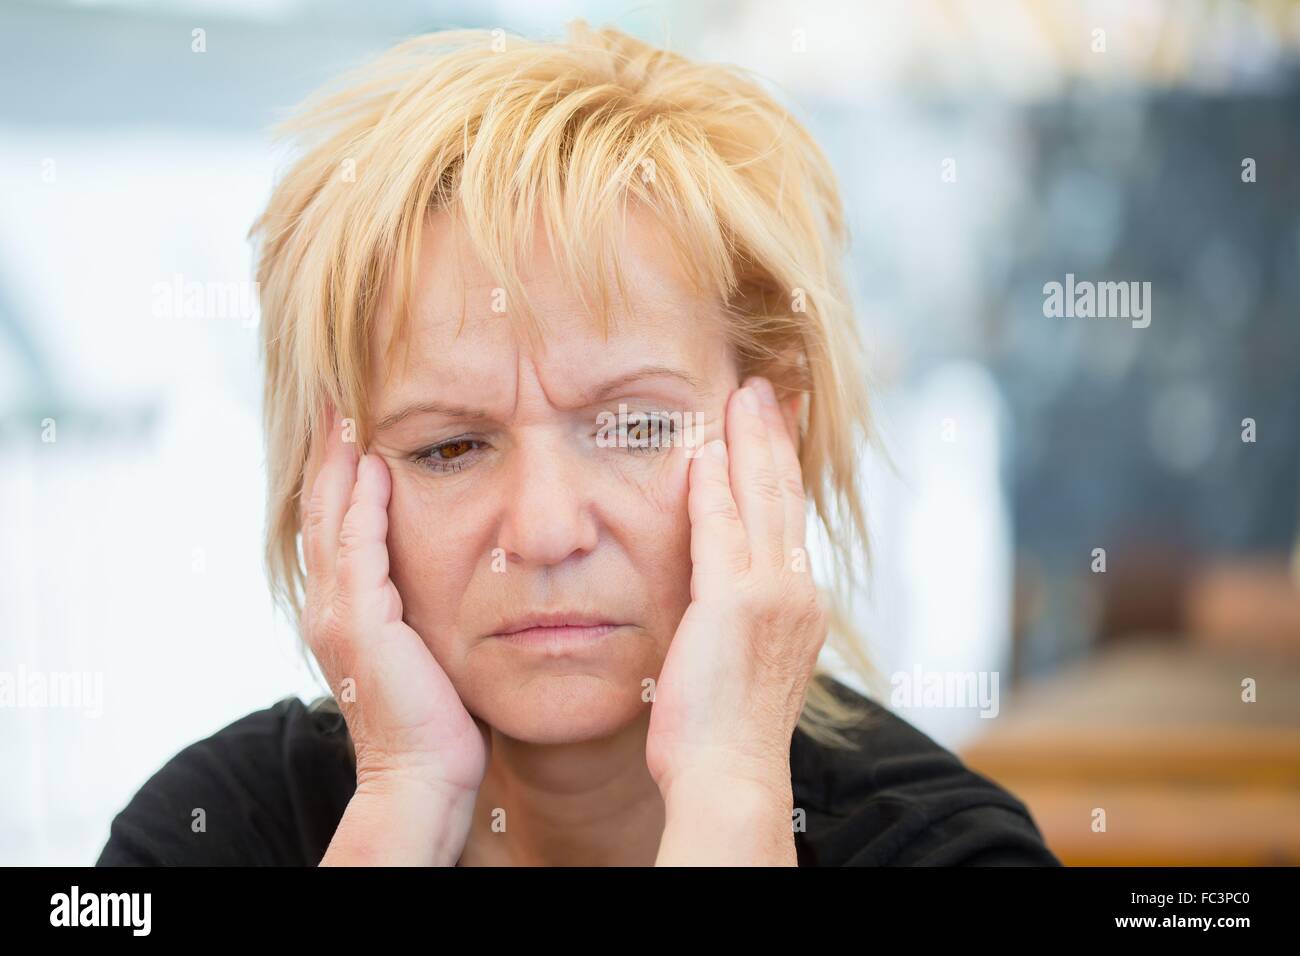 Very worried middle-aged woman Stock Photo